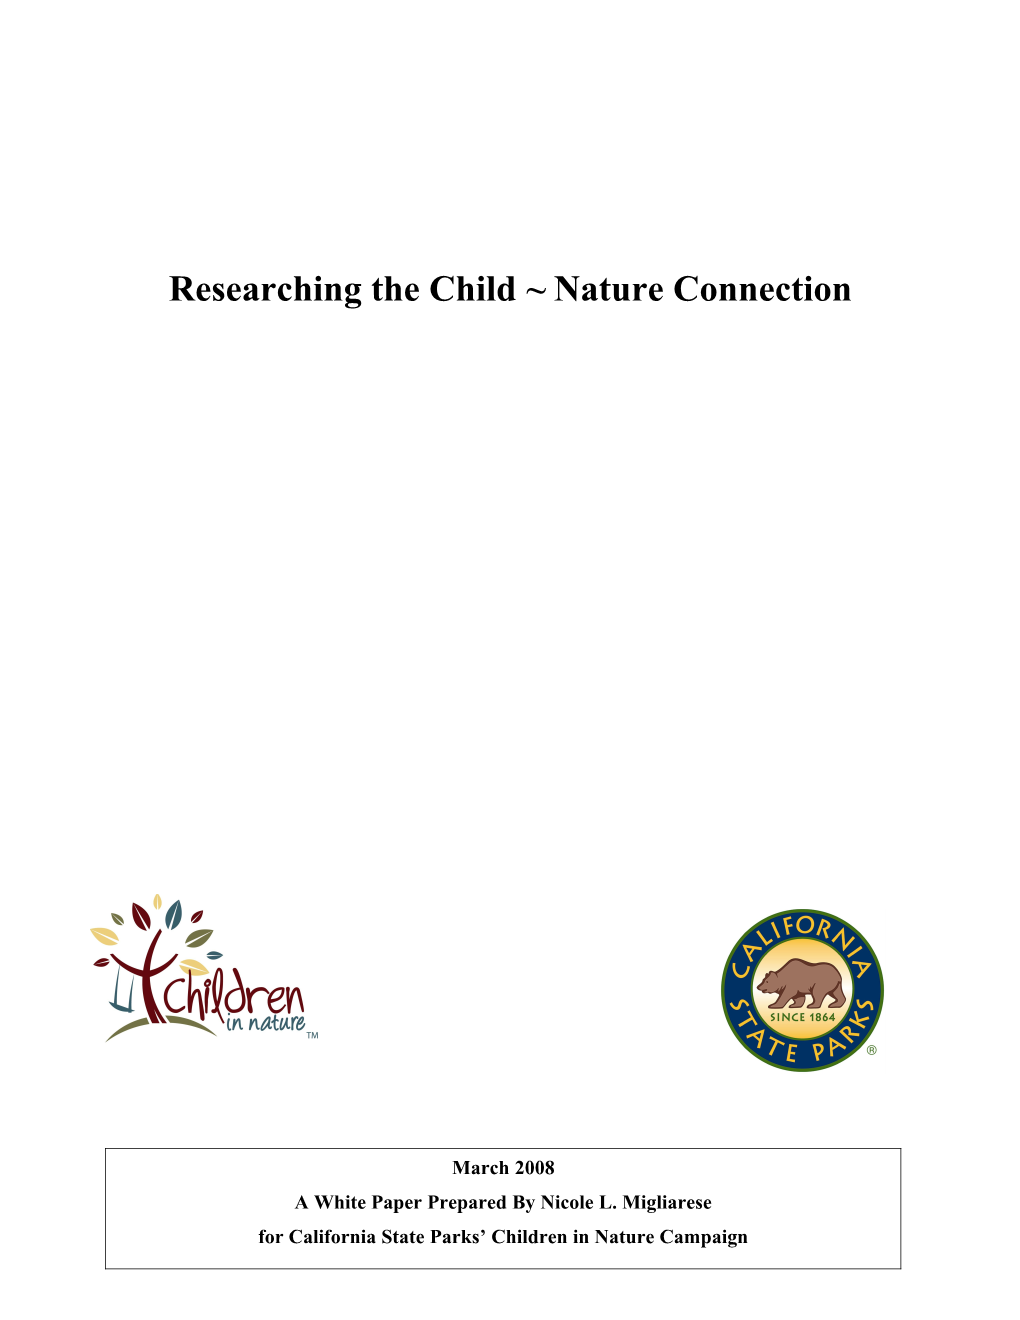 Researching the Child Nature Connection